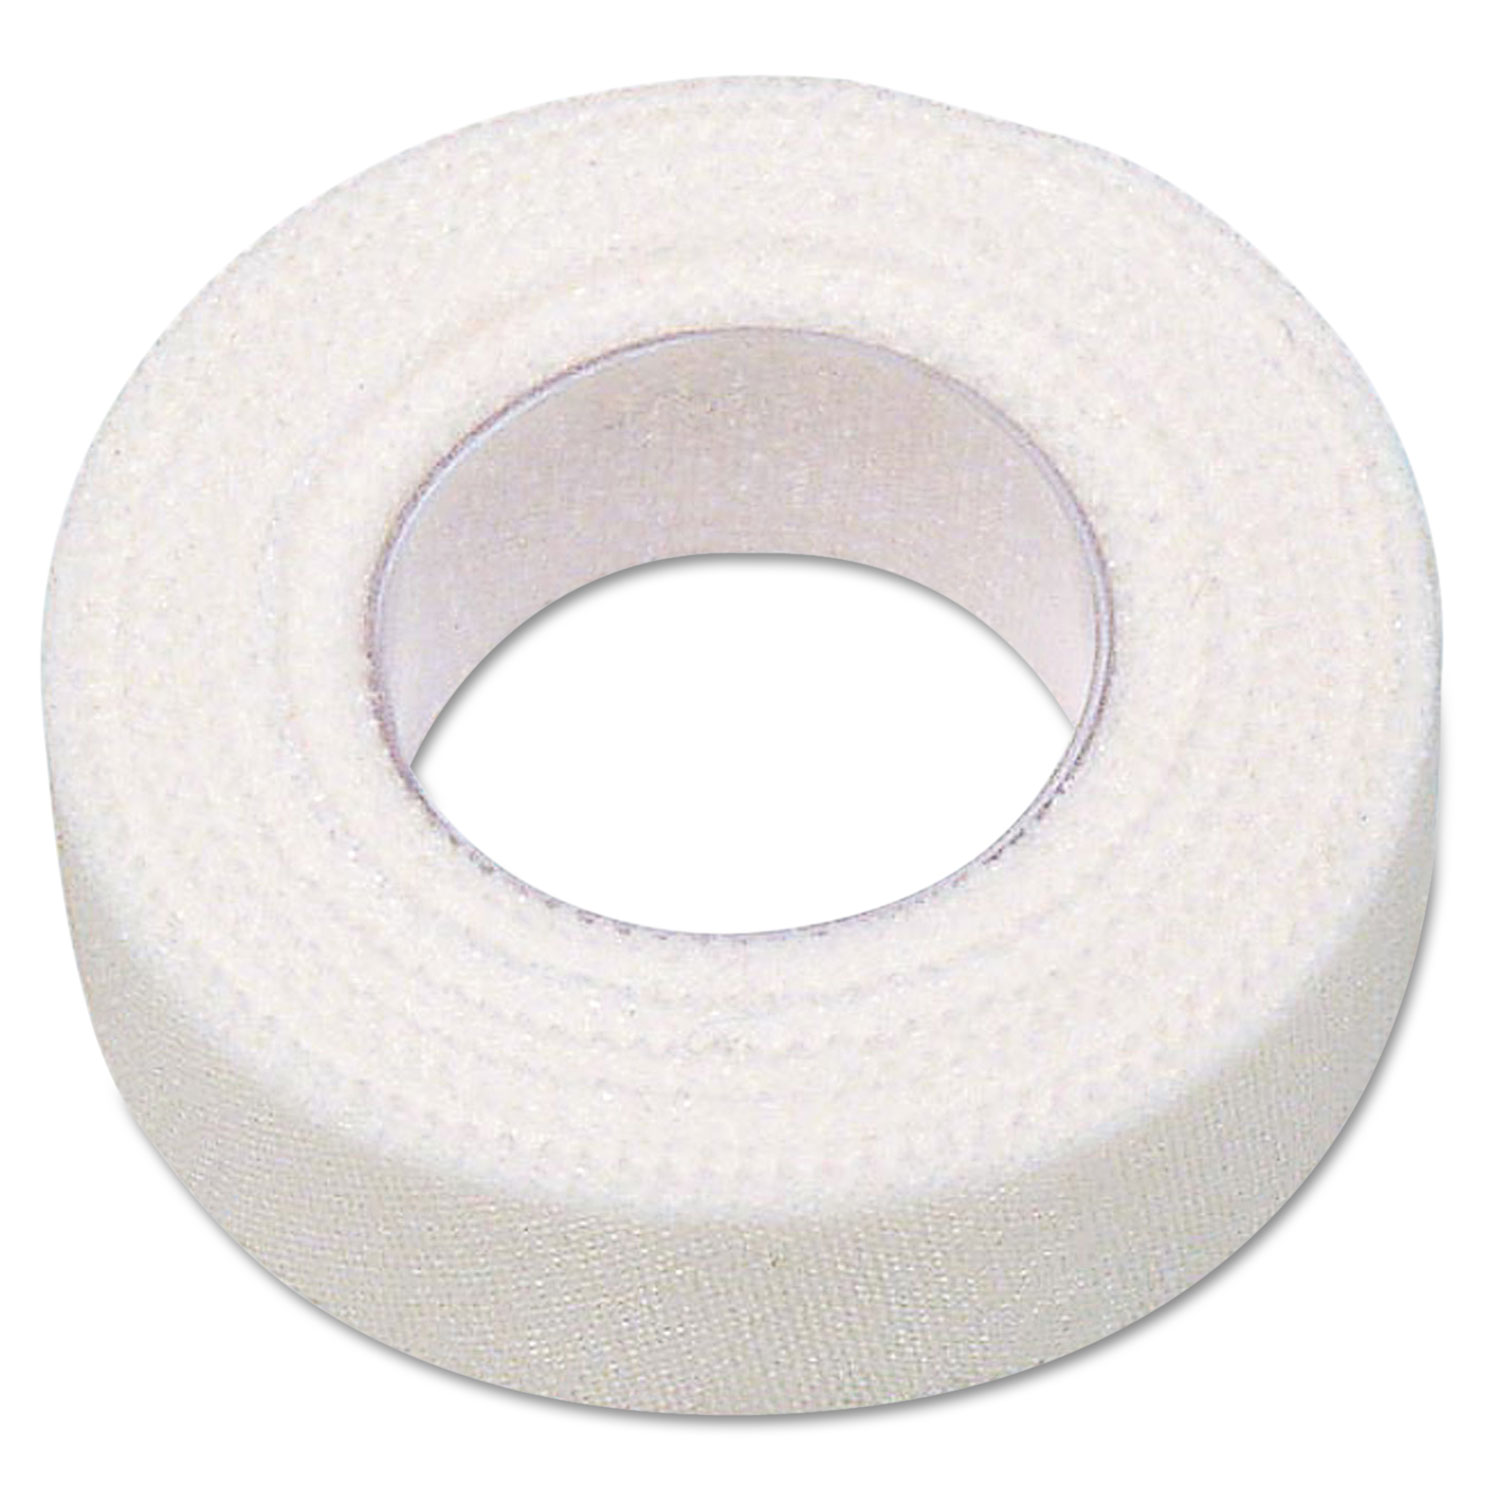 First Aid Adhesive Tape, 1/2 x 10yds, 6 Rolls/Box